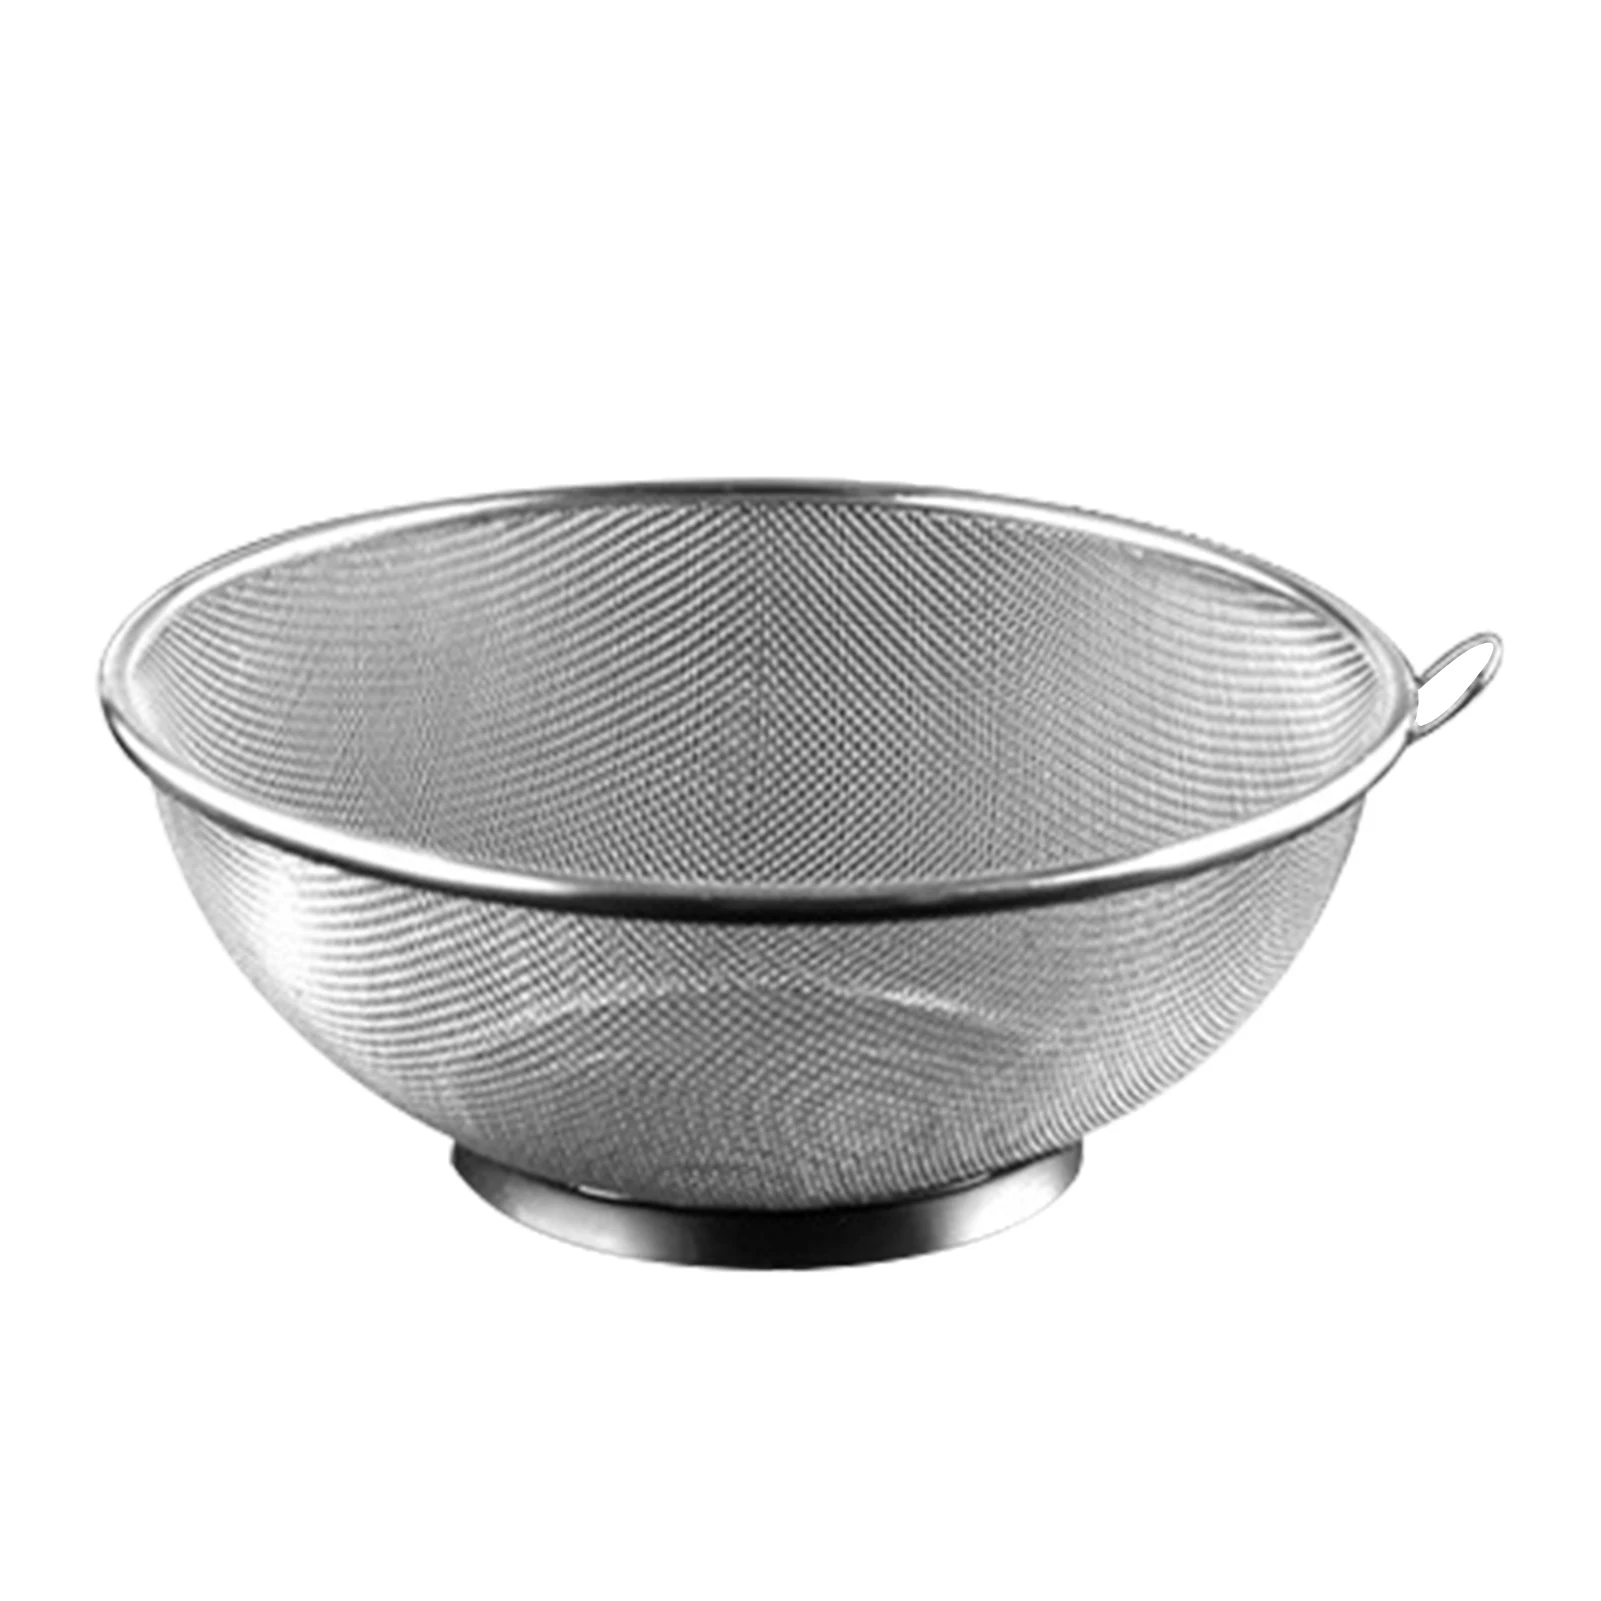 Stainless Steel Drain Basket/Wash Basin/Rice Bowl Dense Gauze Design for Kitchen Supplies TS2 Tools Gadgets | Дом и сад